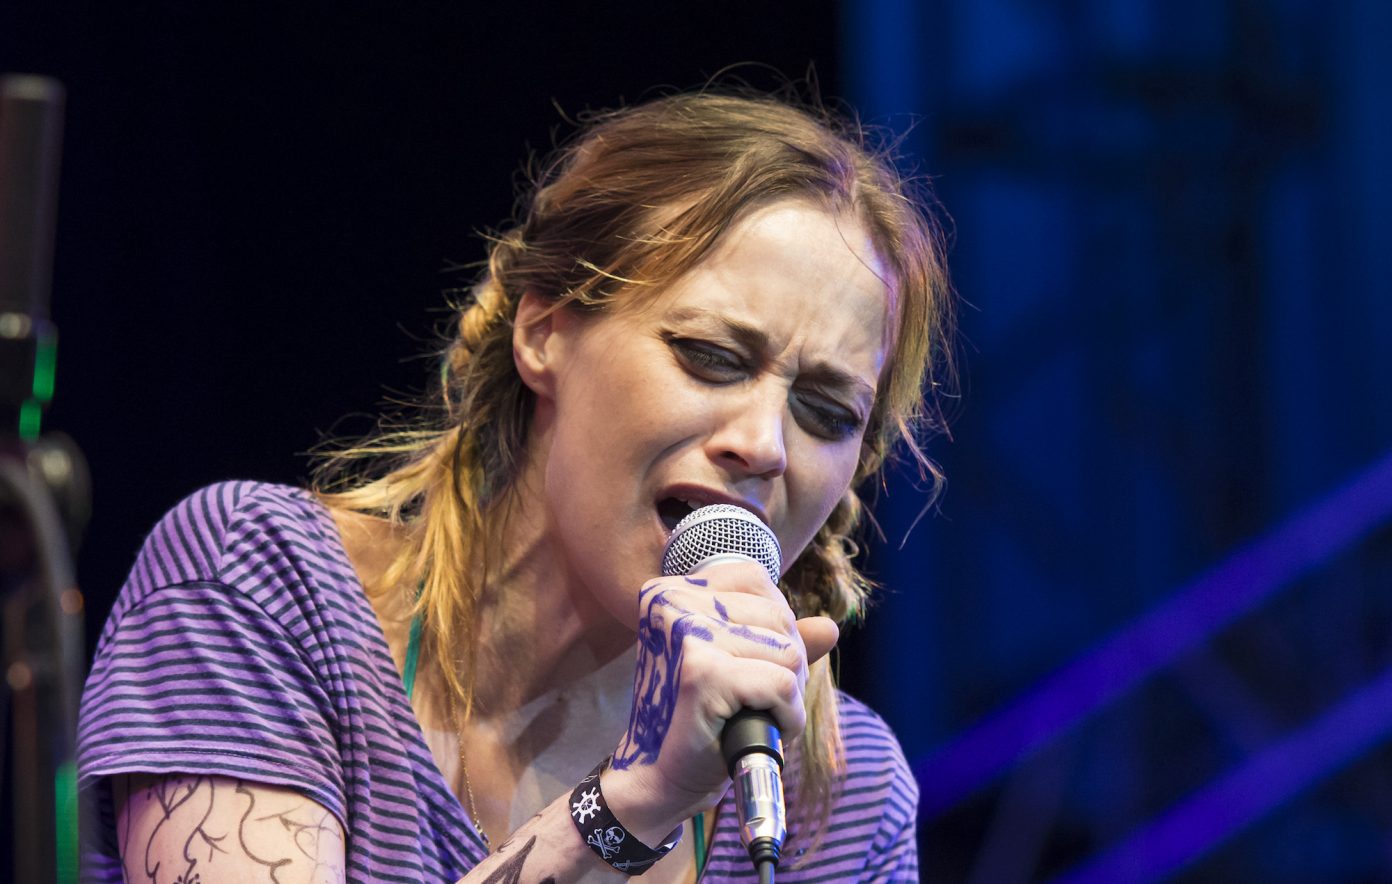 Fiona Apple sings hunches over slightly as she sings passionately into a microphone, her brown hair with sandy blond highlights in messy, short braids.